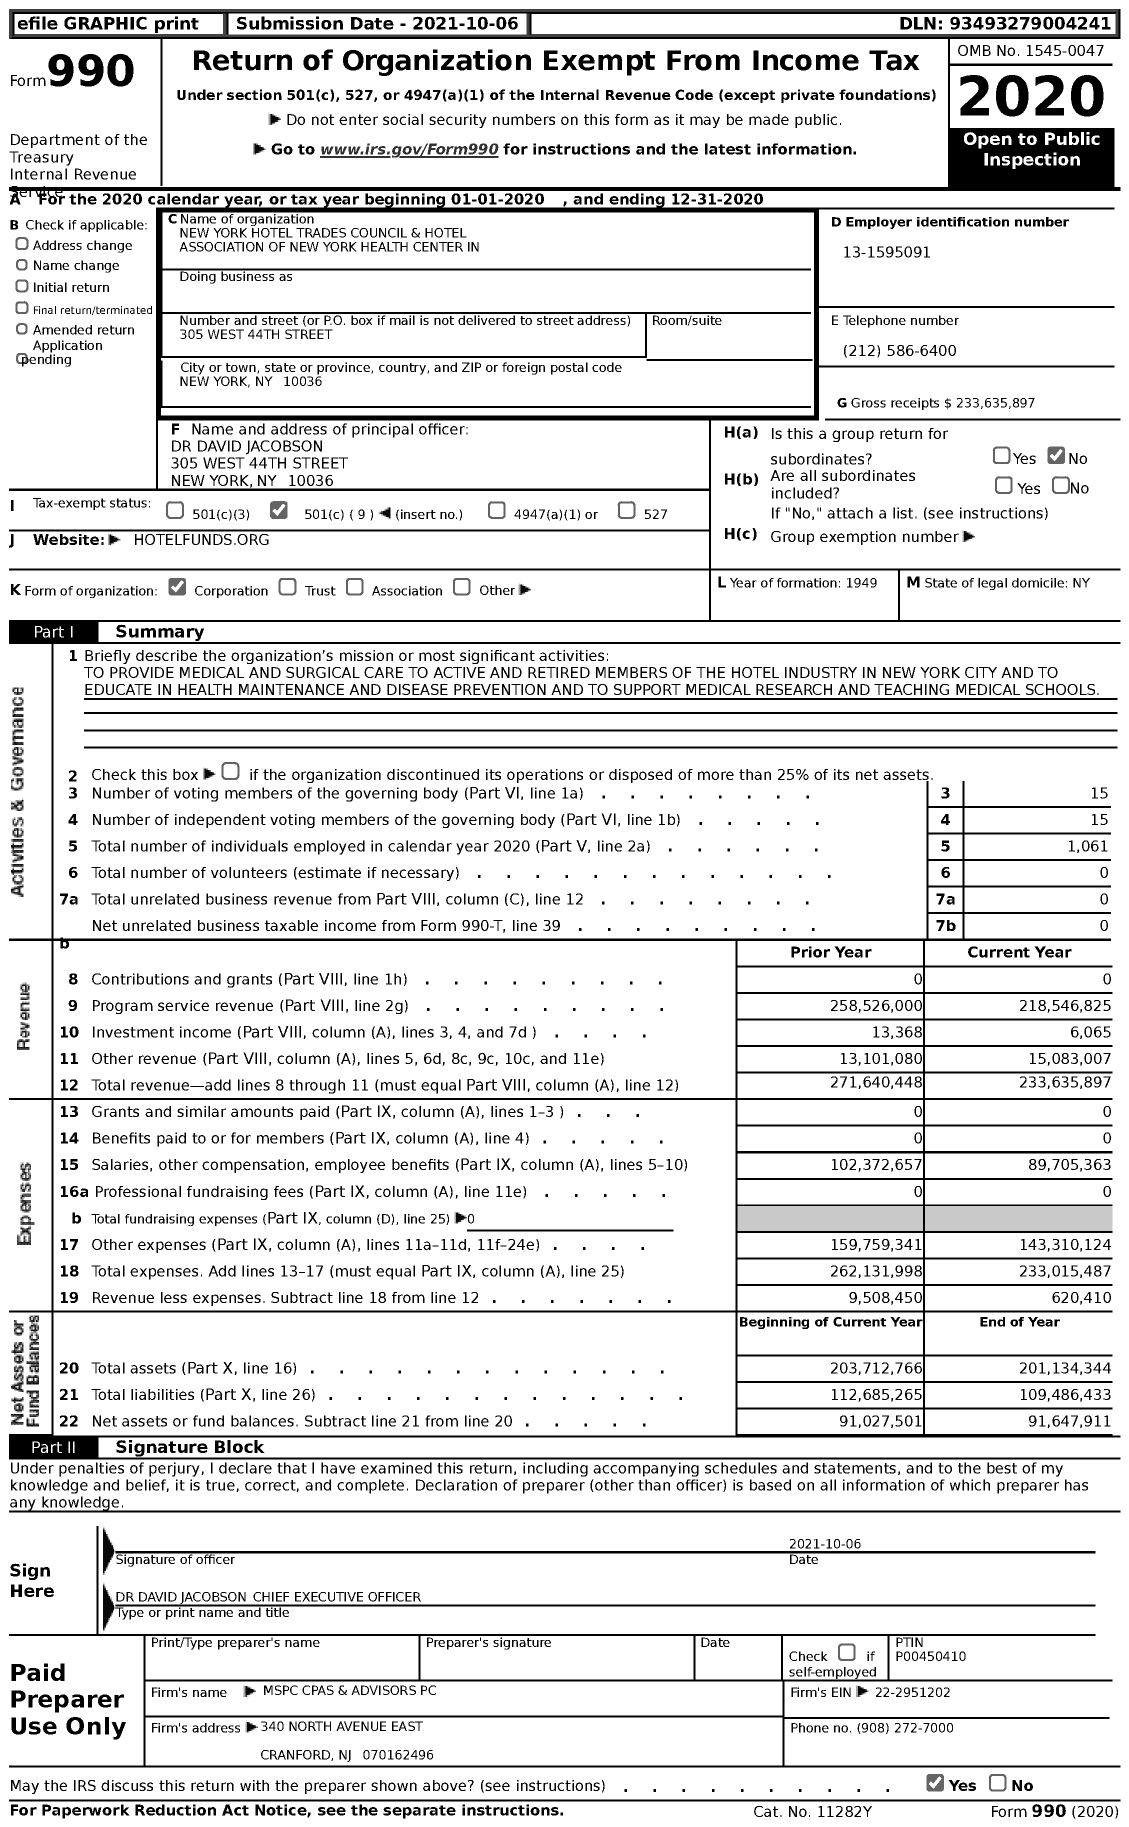 Image of first page of 2020 Form 990 for New York Hotel Trades Council and Hotel Association of New York Health Center in